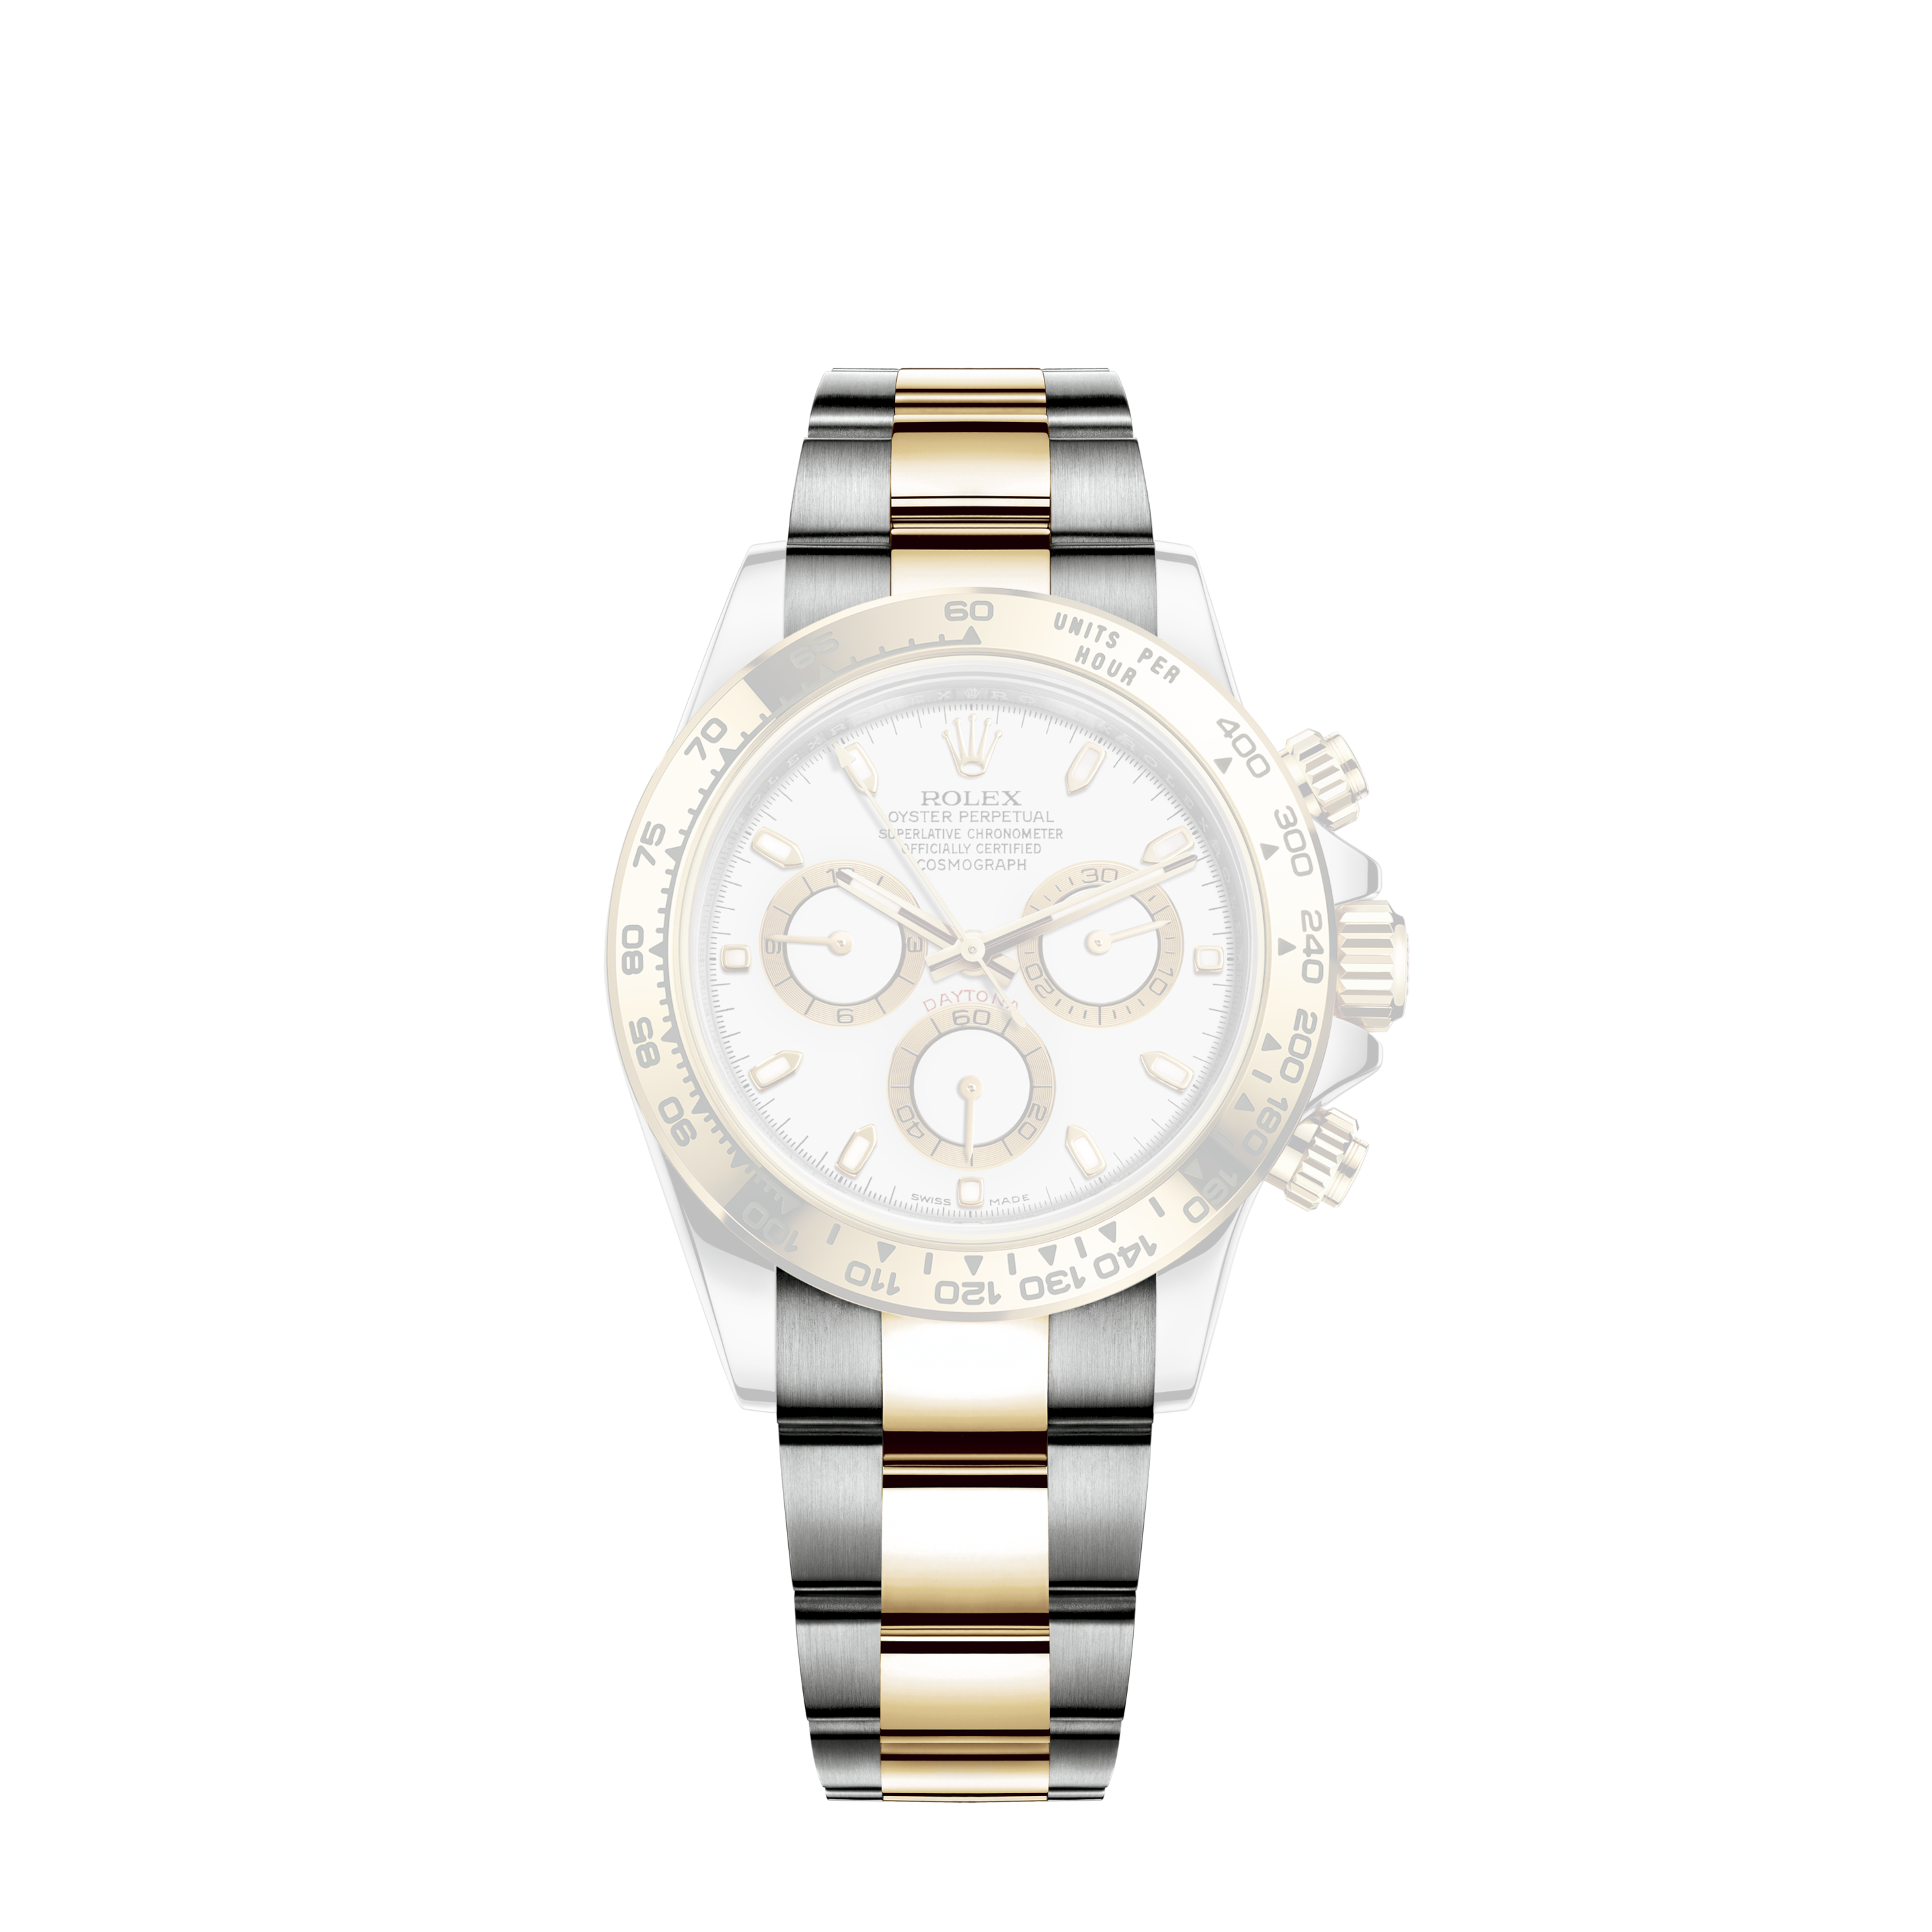 Rolex | Oyster-perpetual Datejust ref. 6605, Stainless Steel and 18kt Rose Gold